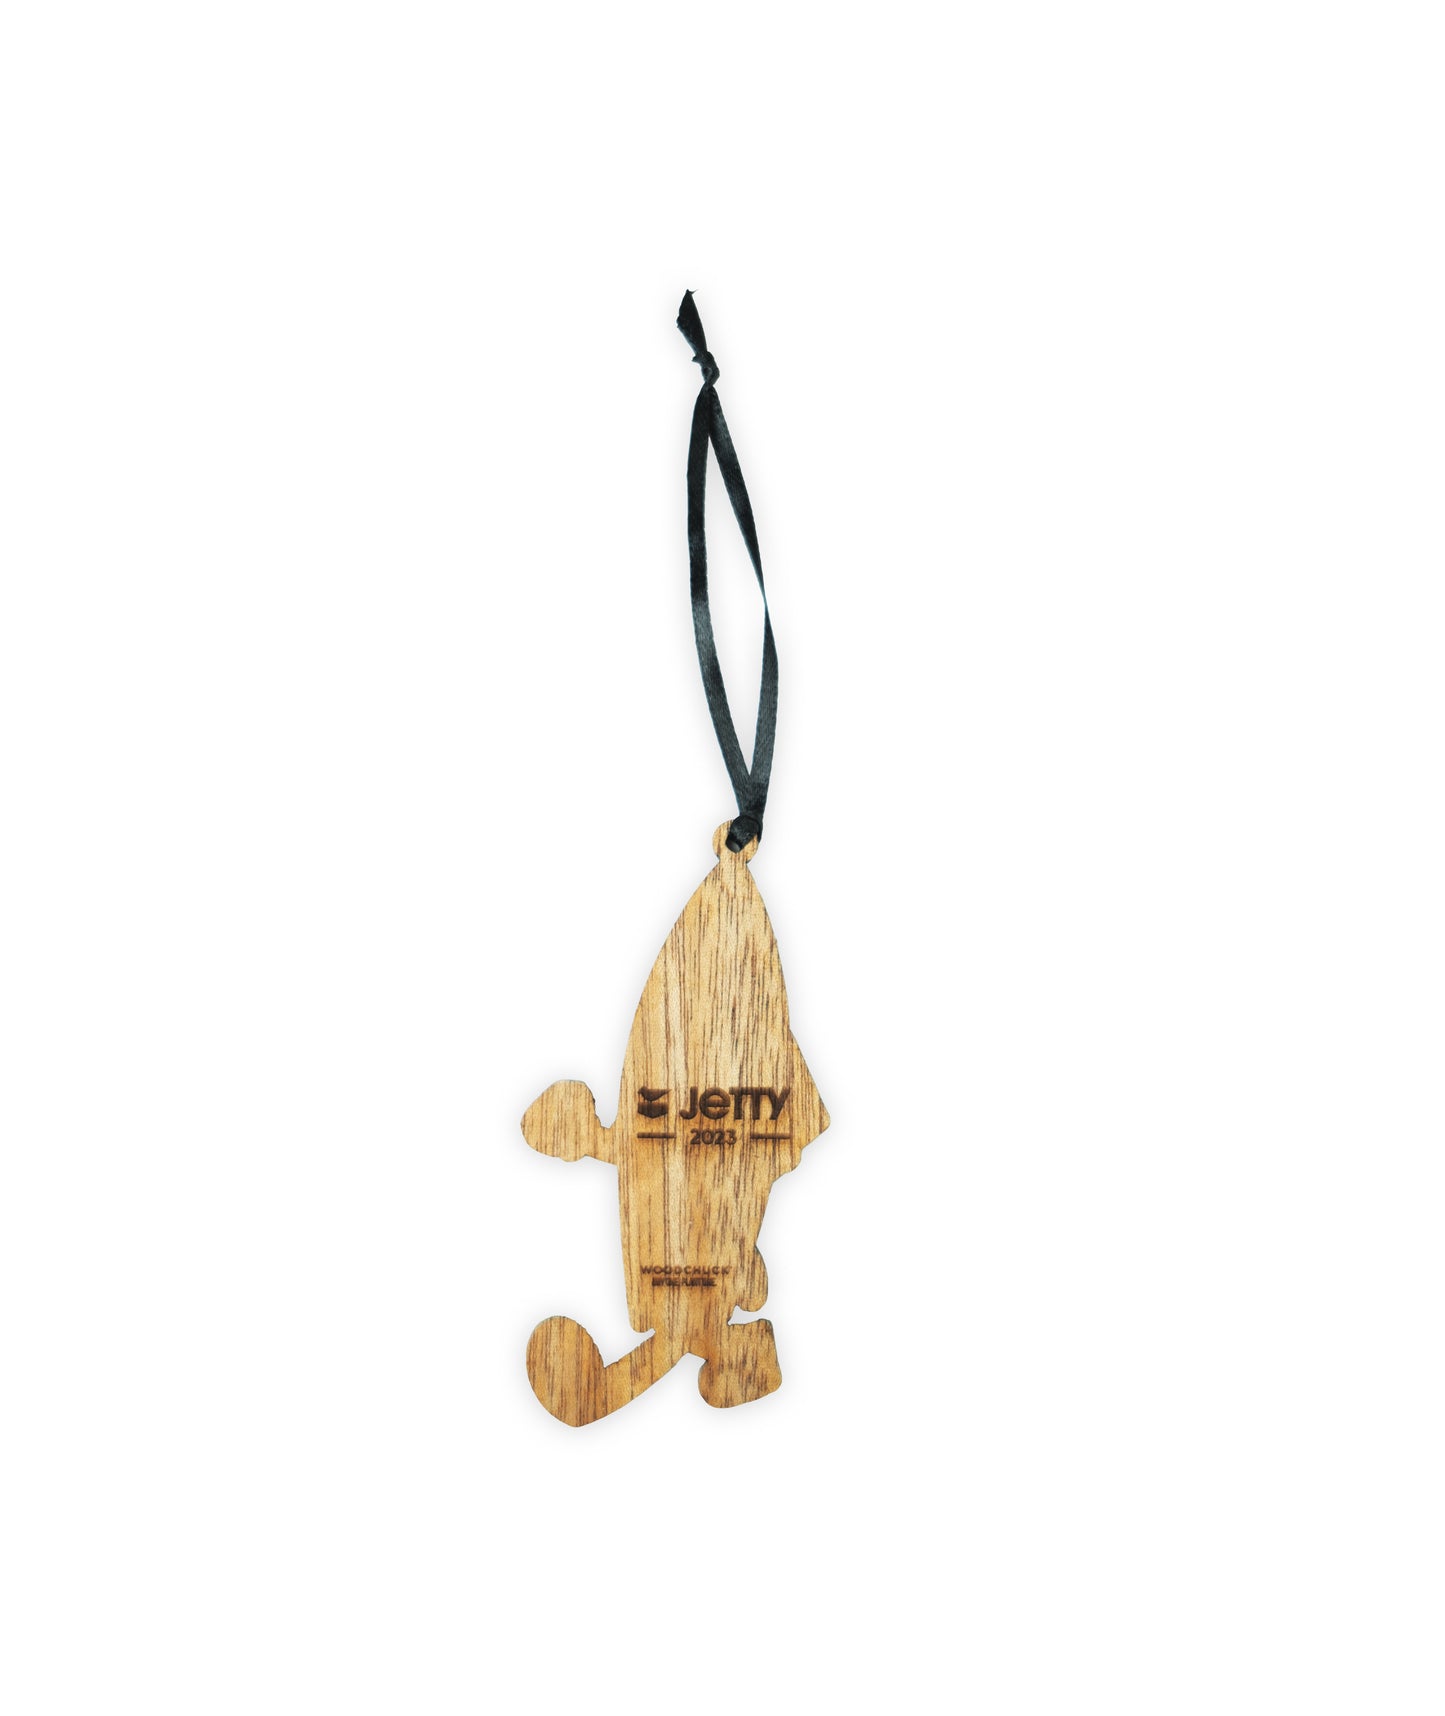 Surf Club Wooden Ornament - Brown